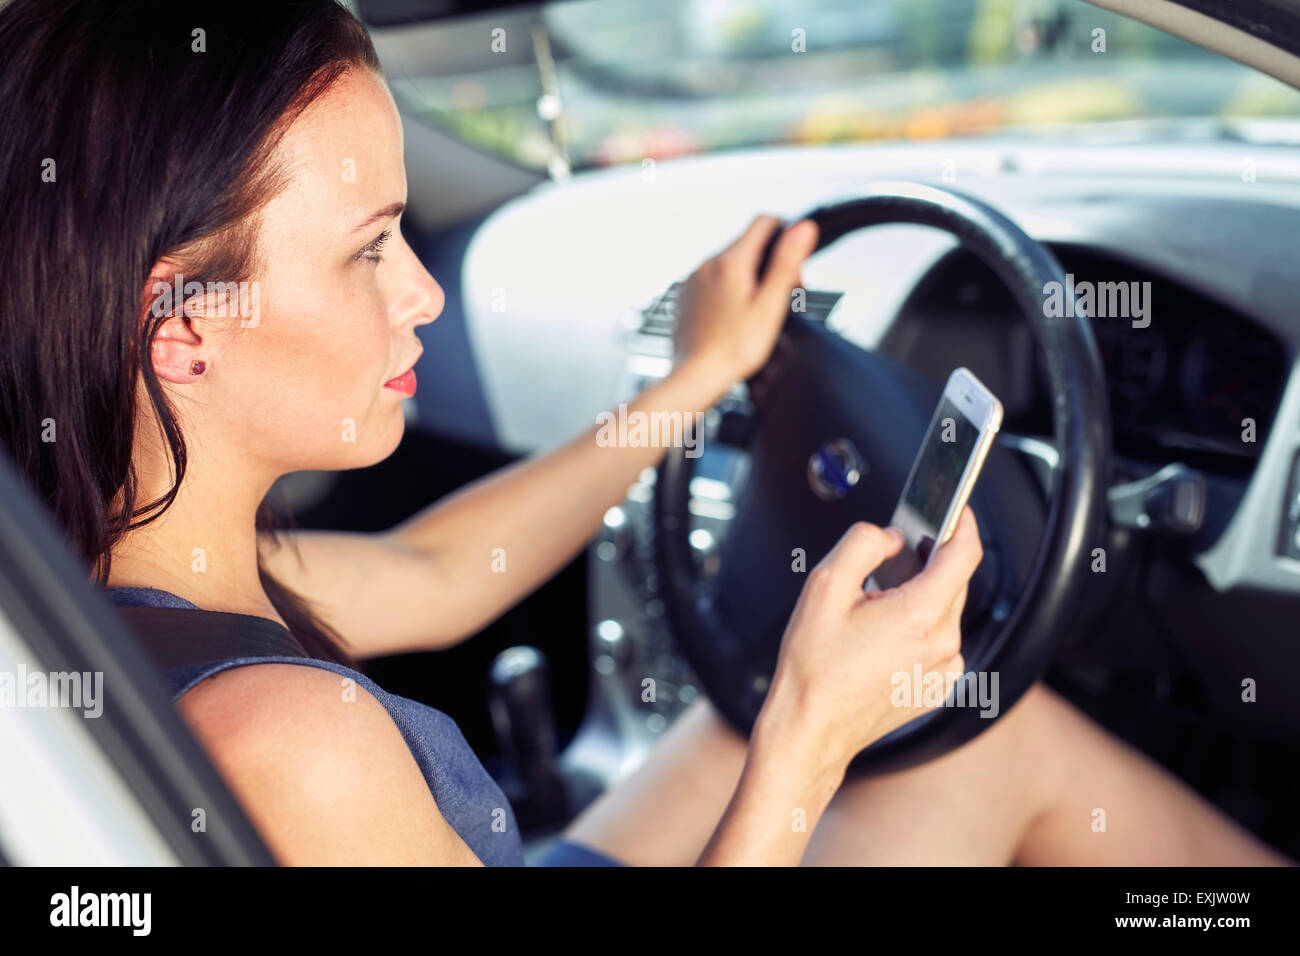 Woman using mobile phone whilst driving Stock Photo